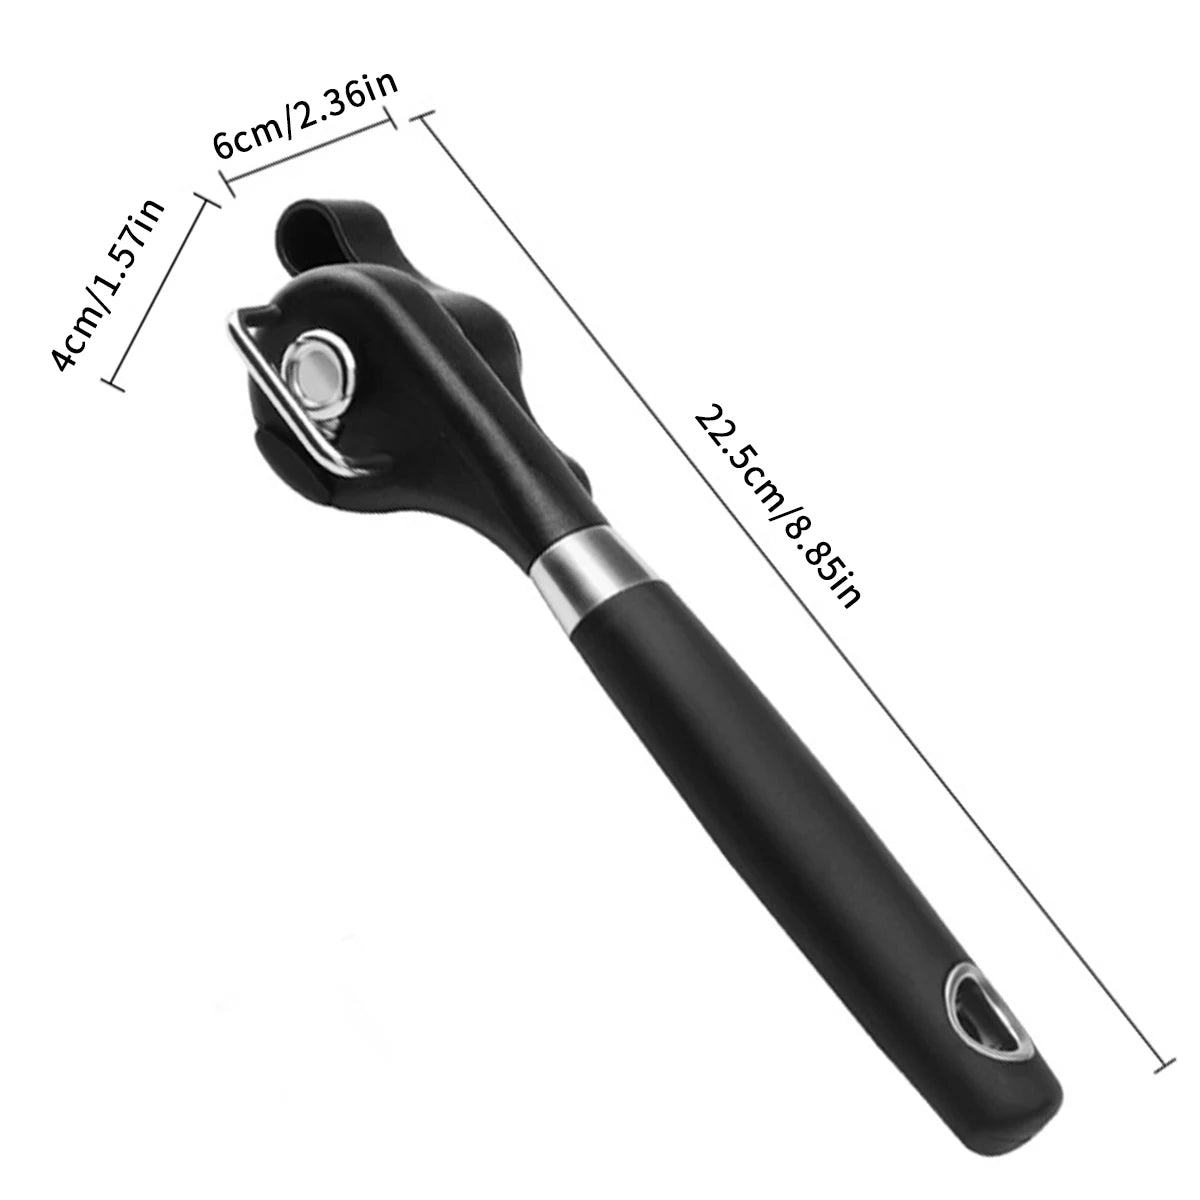 Manual Can Opener - easynow.com